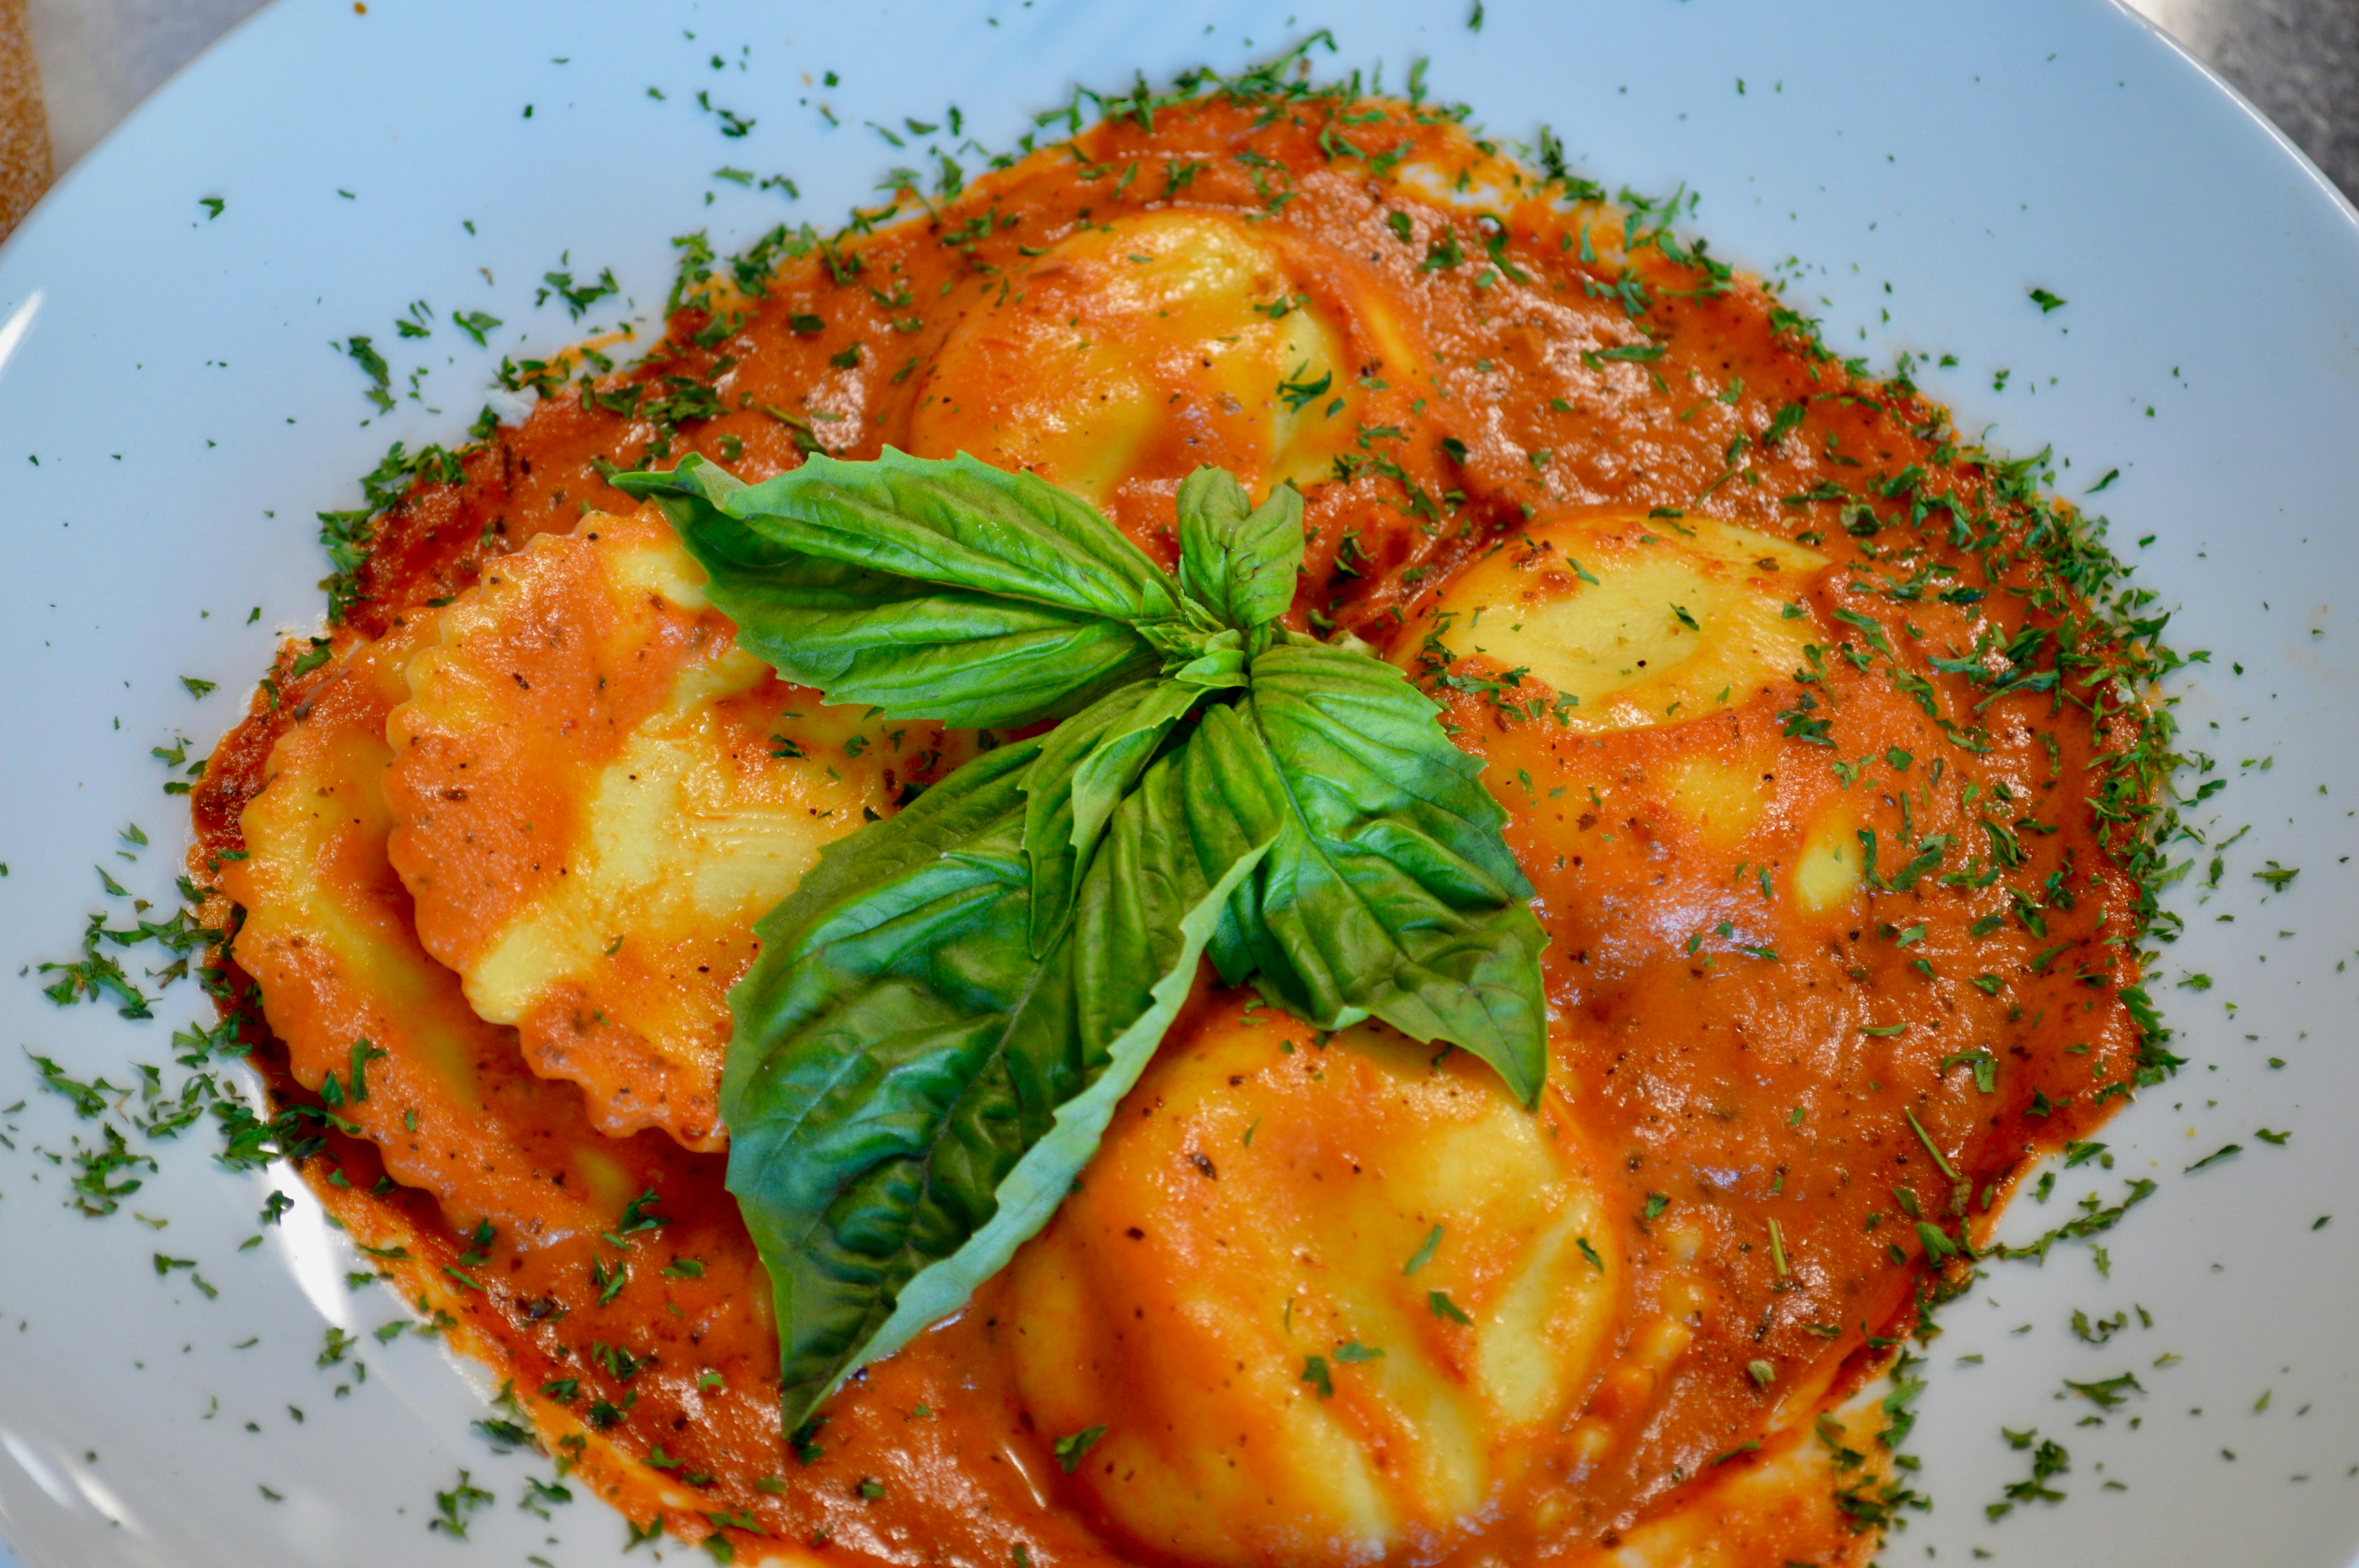 Lobster Ravioli with Pink Sauce from Aroma Pizza & Pasta in Lake Forest, CA